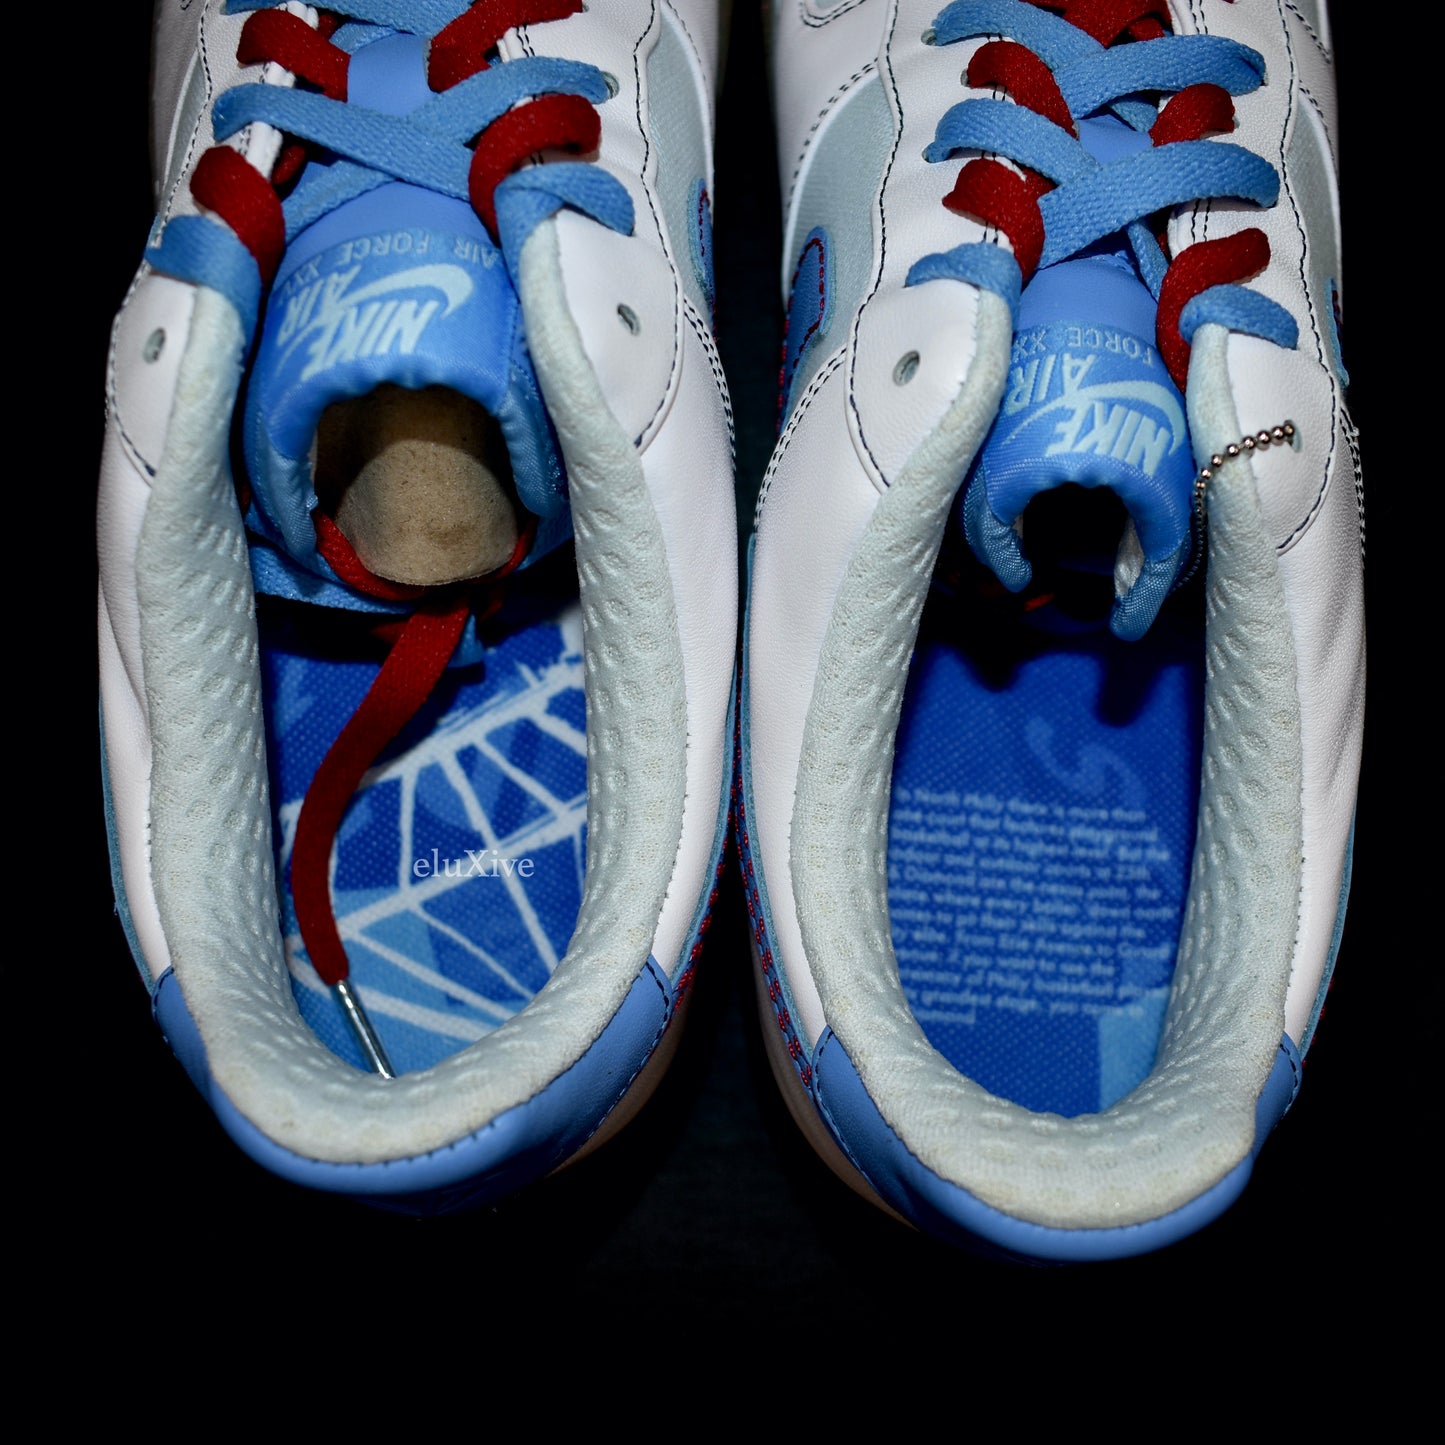 Nike - Air Force 1 Premium '07 'South Philly' (Glacier Blue)